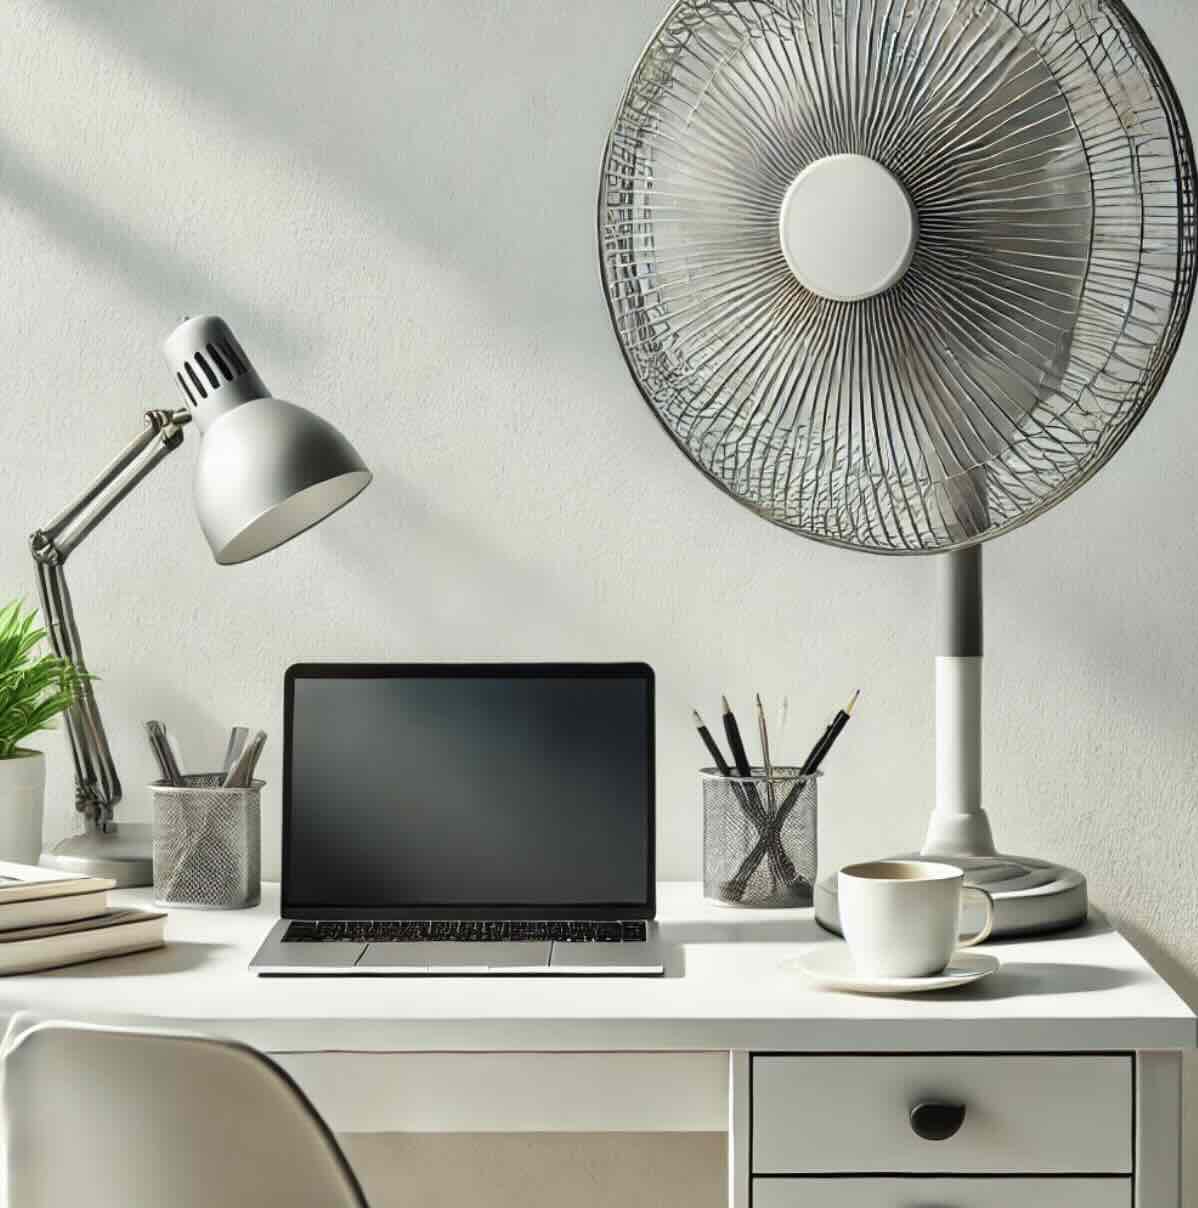 Is It Safe to Leave a Desk Fan On All Day